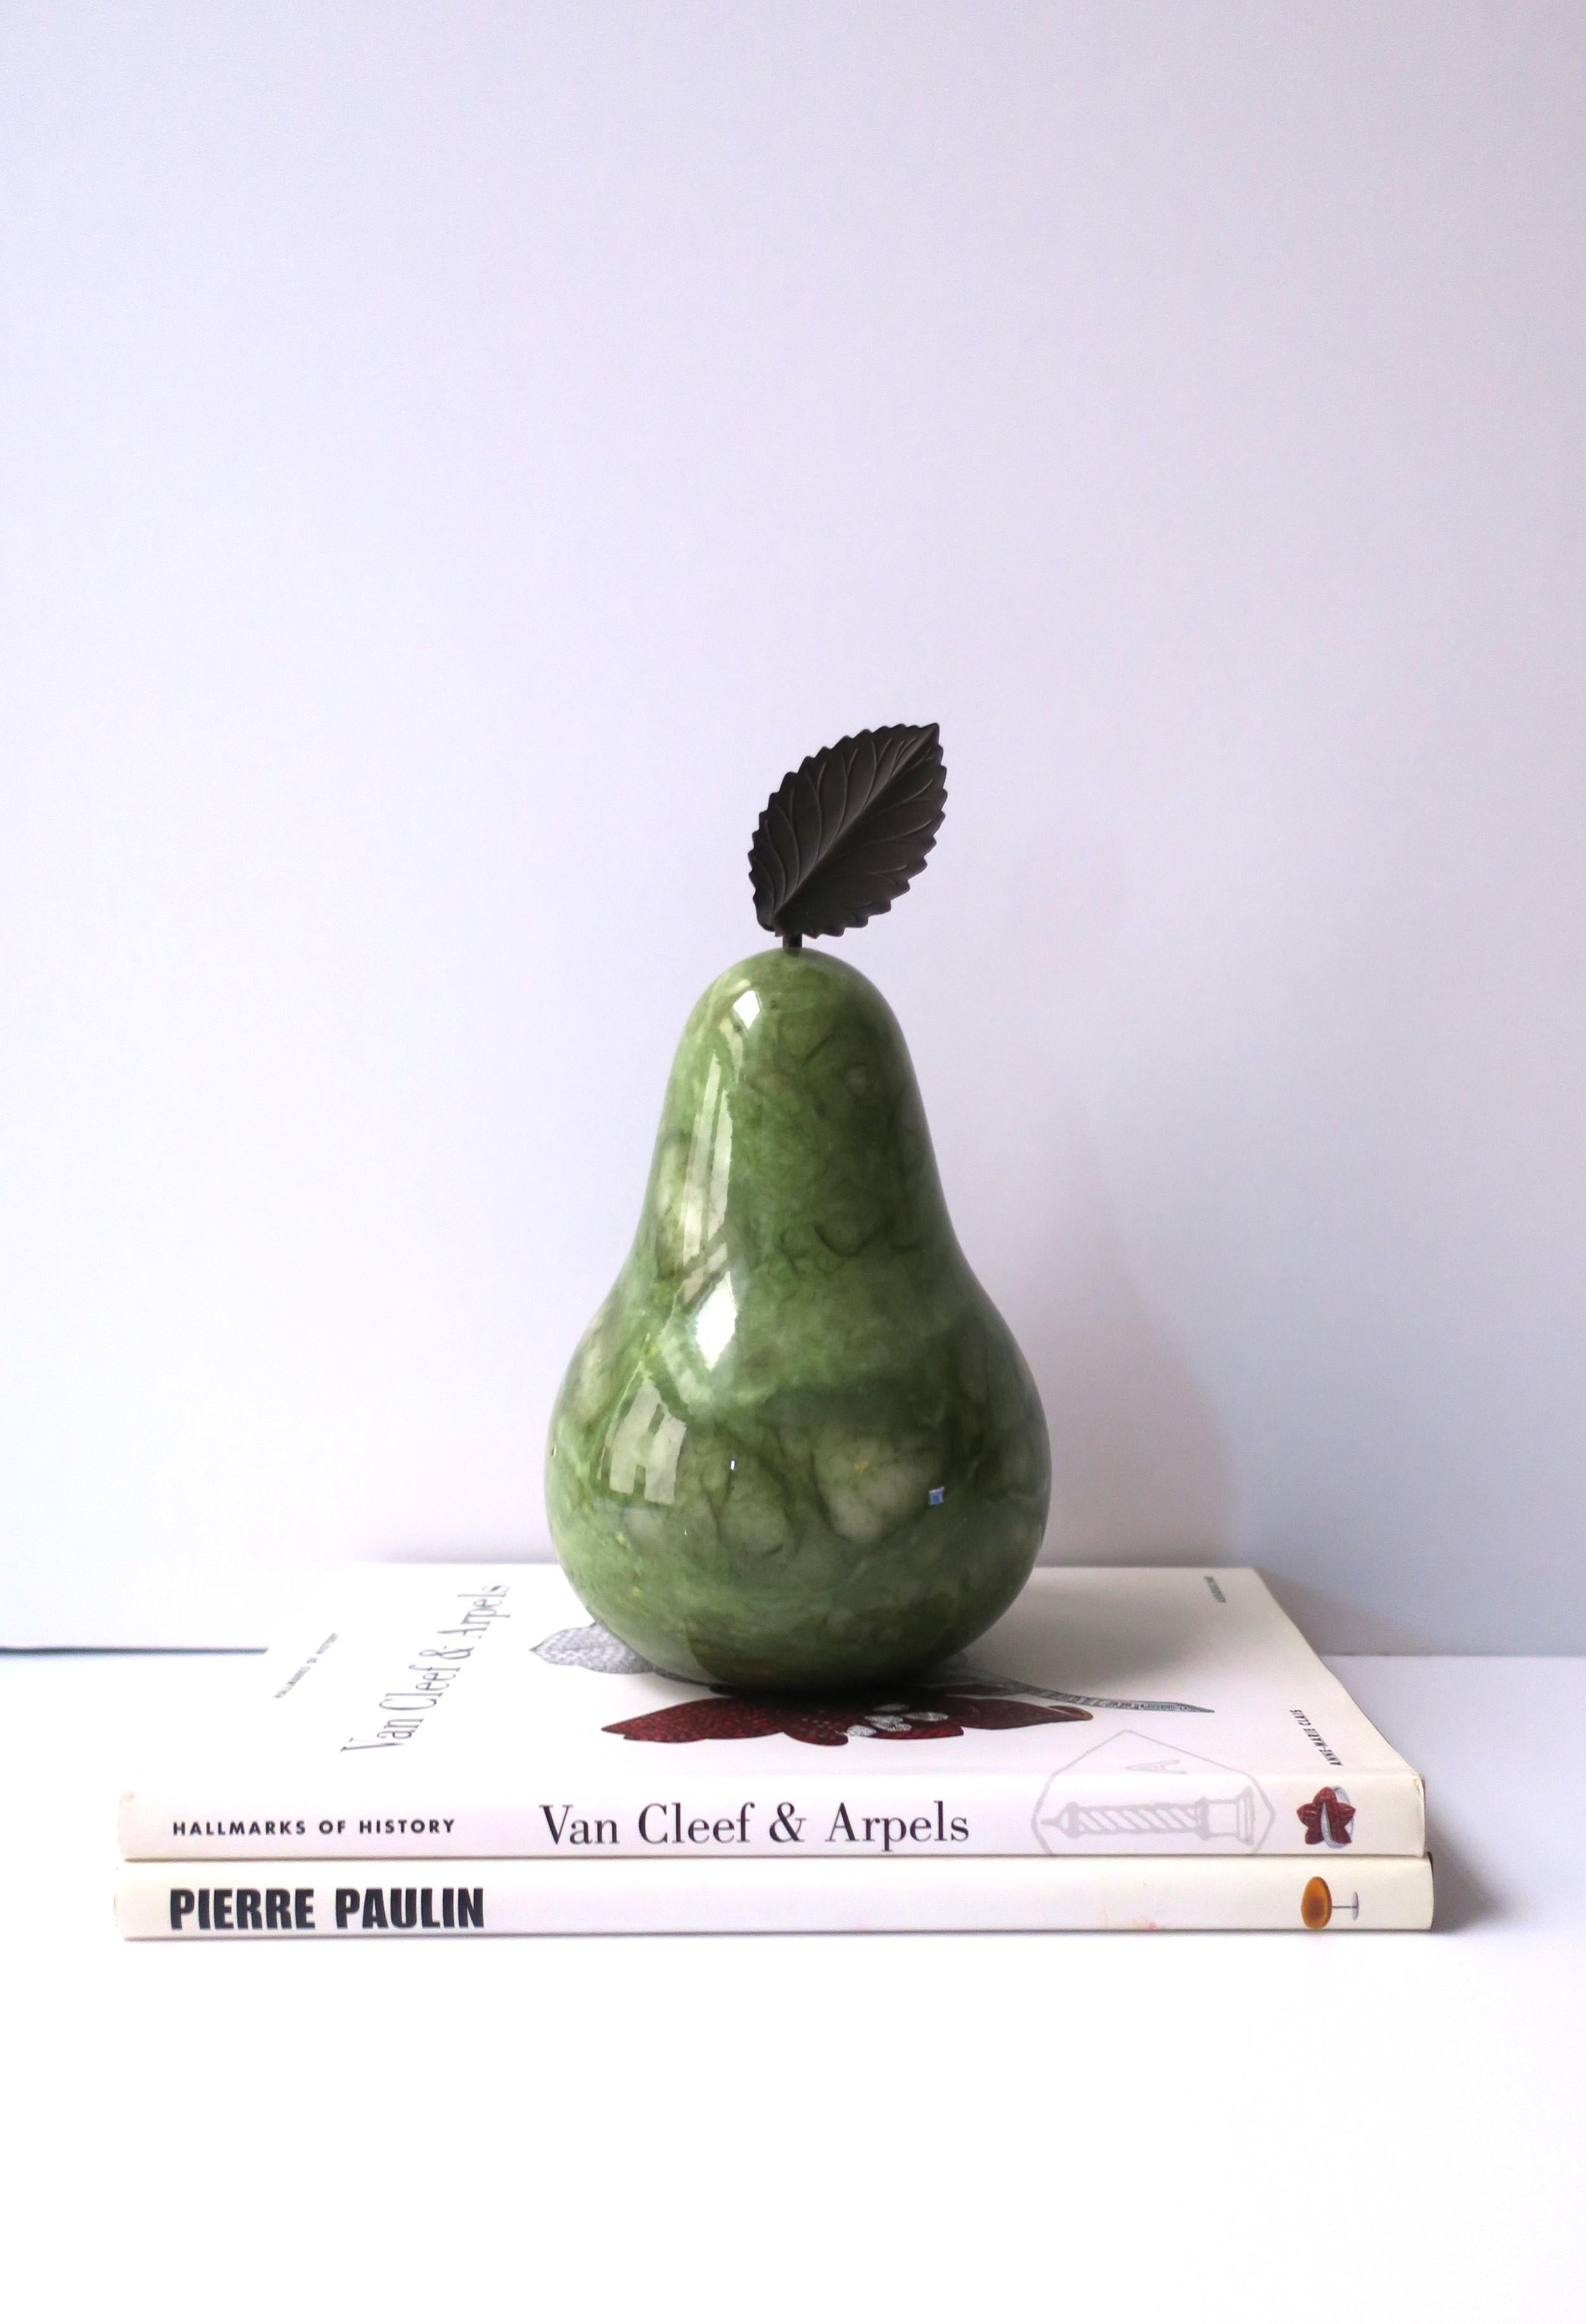 Dyed Italian Alabaster Marble Fruit Pear with Leaf Decorative Object or Bookend